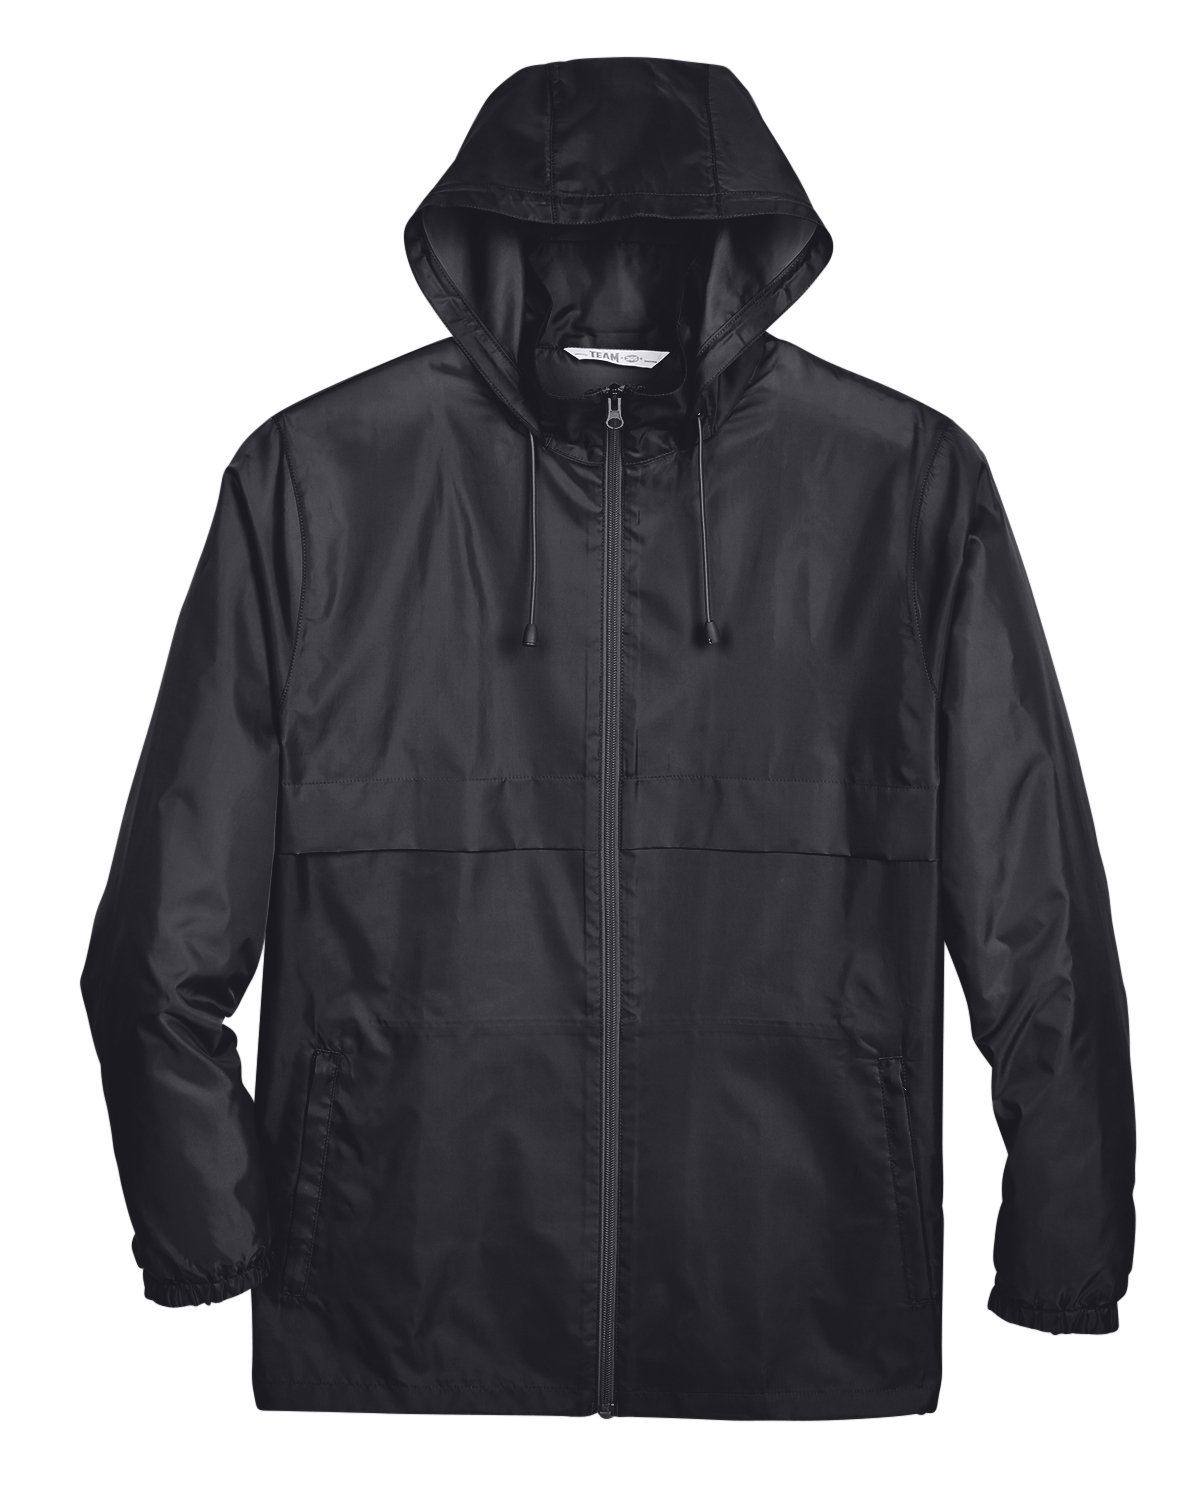 Team 365 Adult Zone Protect Lightweight Jacket | alphabroder Canada